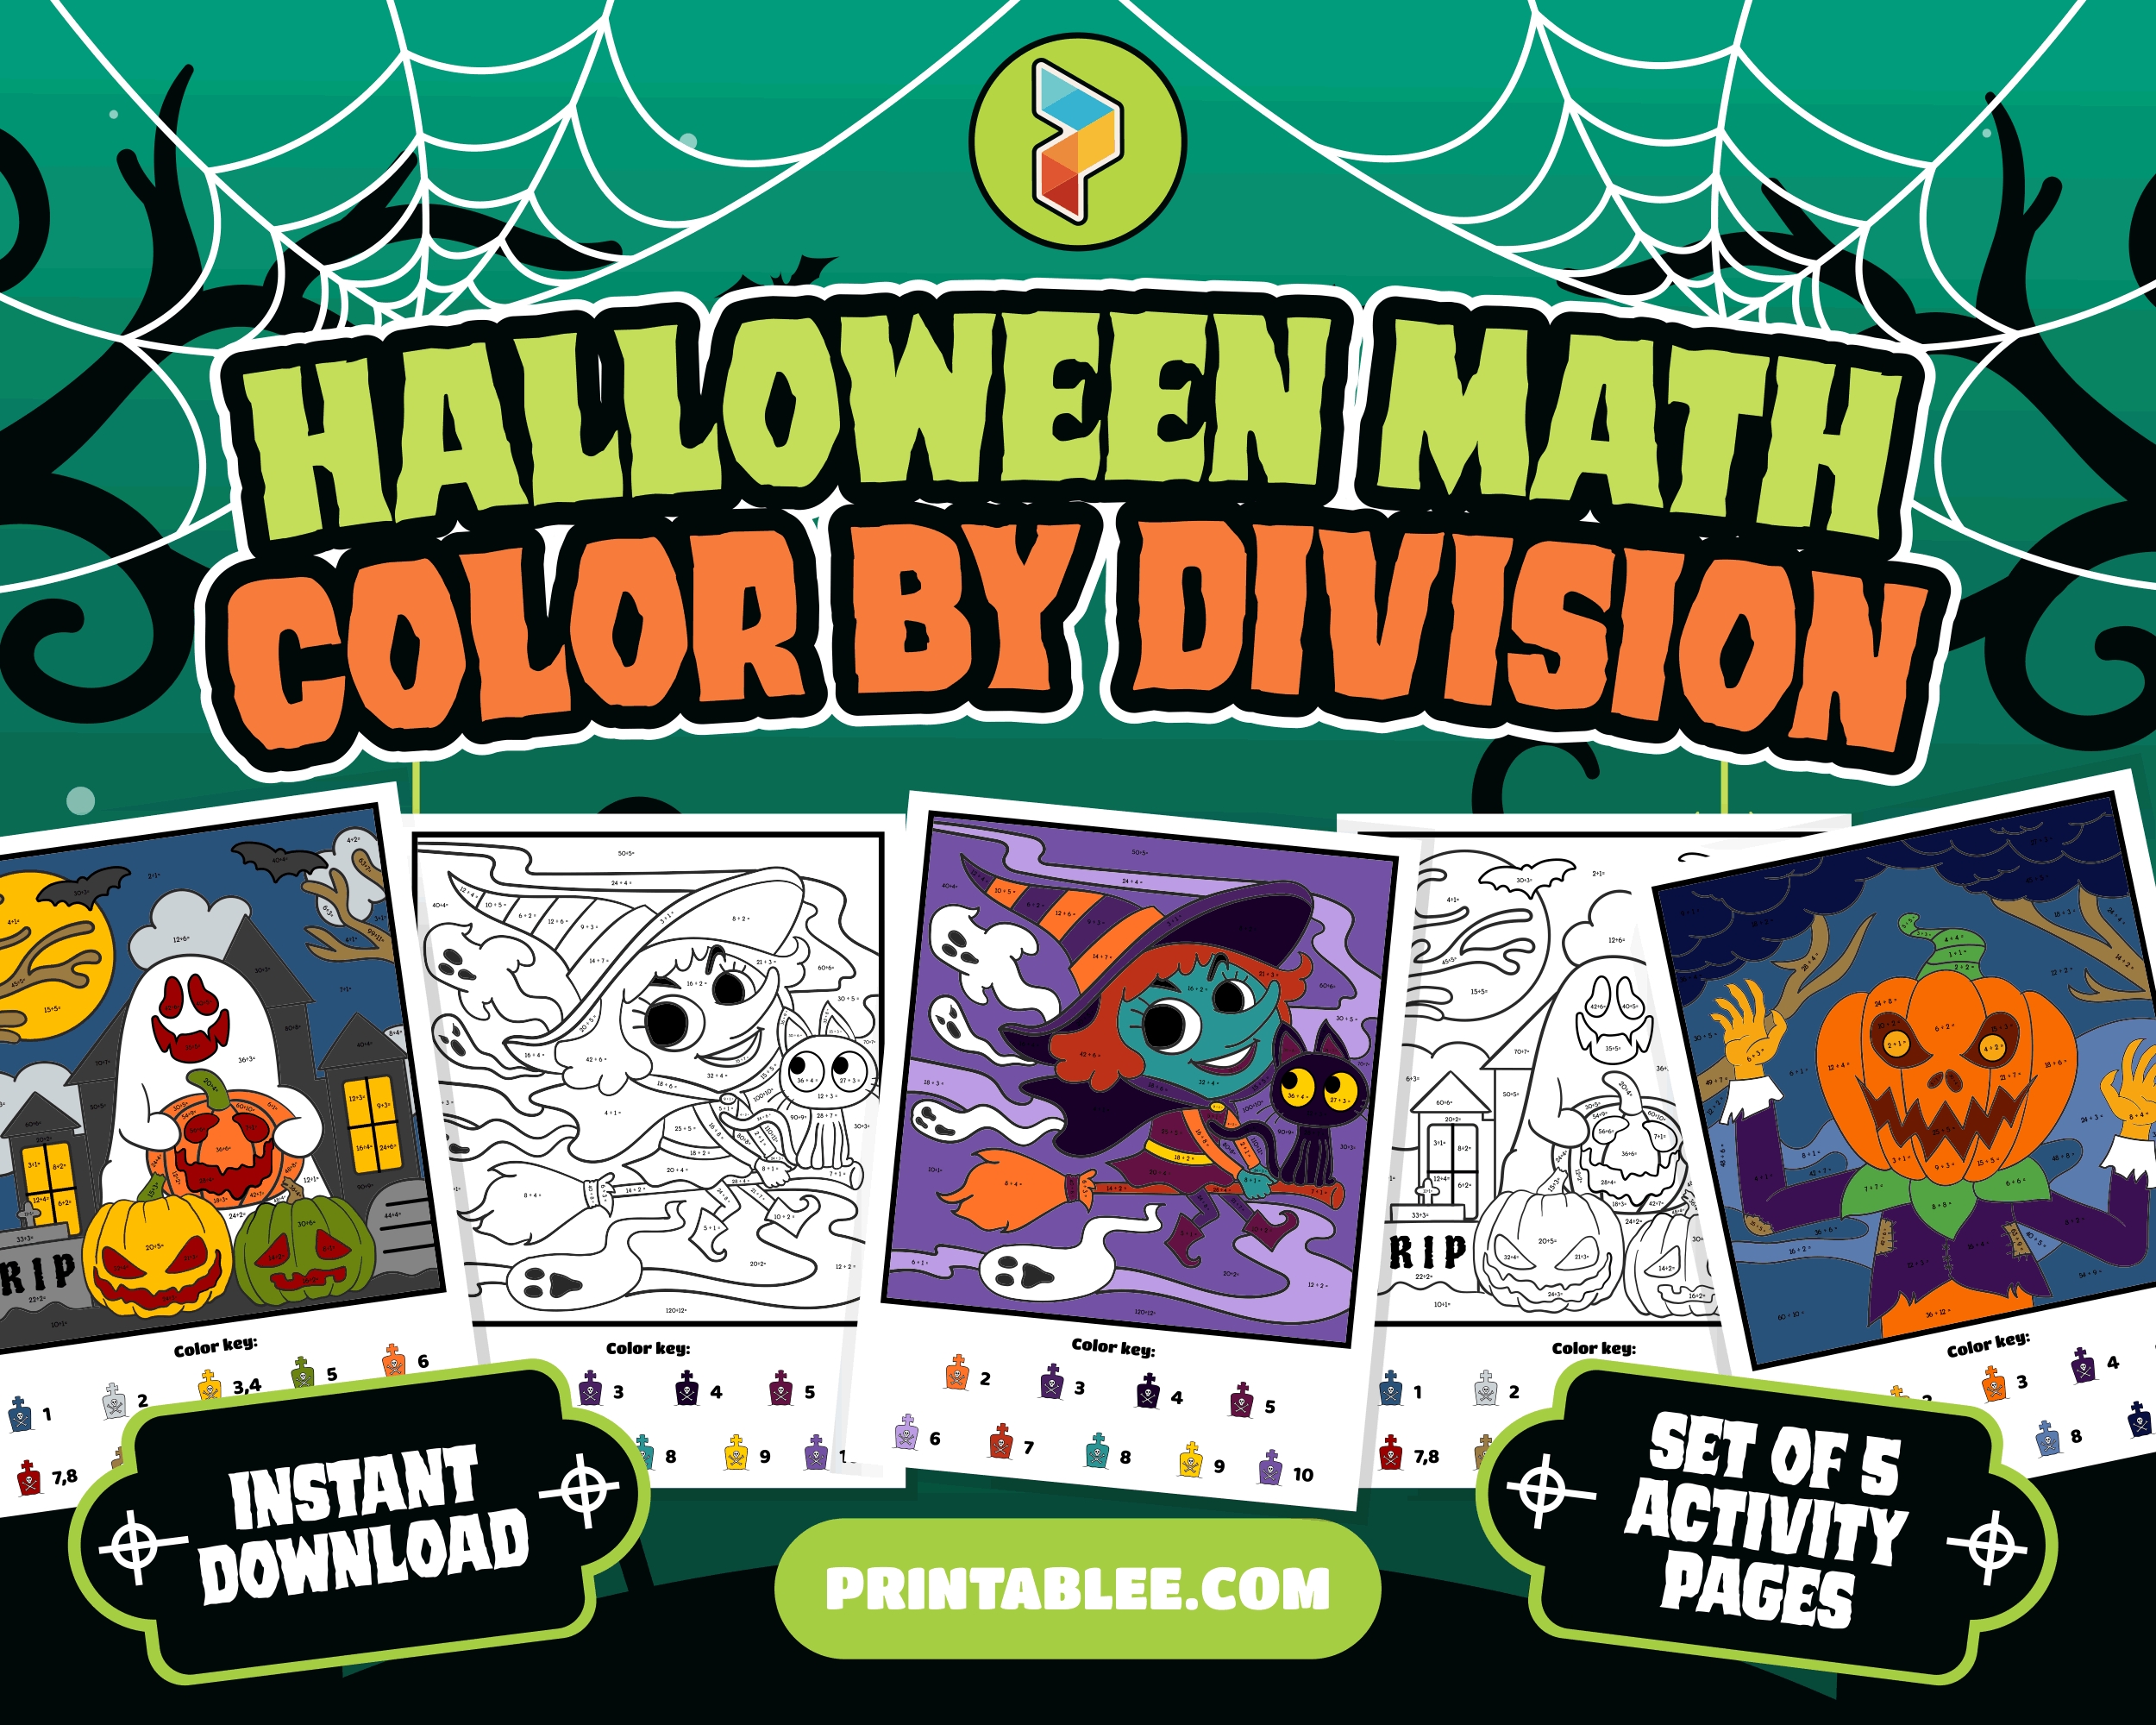 Fall and Halloween Printable Coloring Activity for Kids - Holiday Learning Math Division | Halloween Math Color by Division